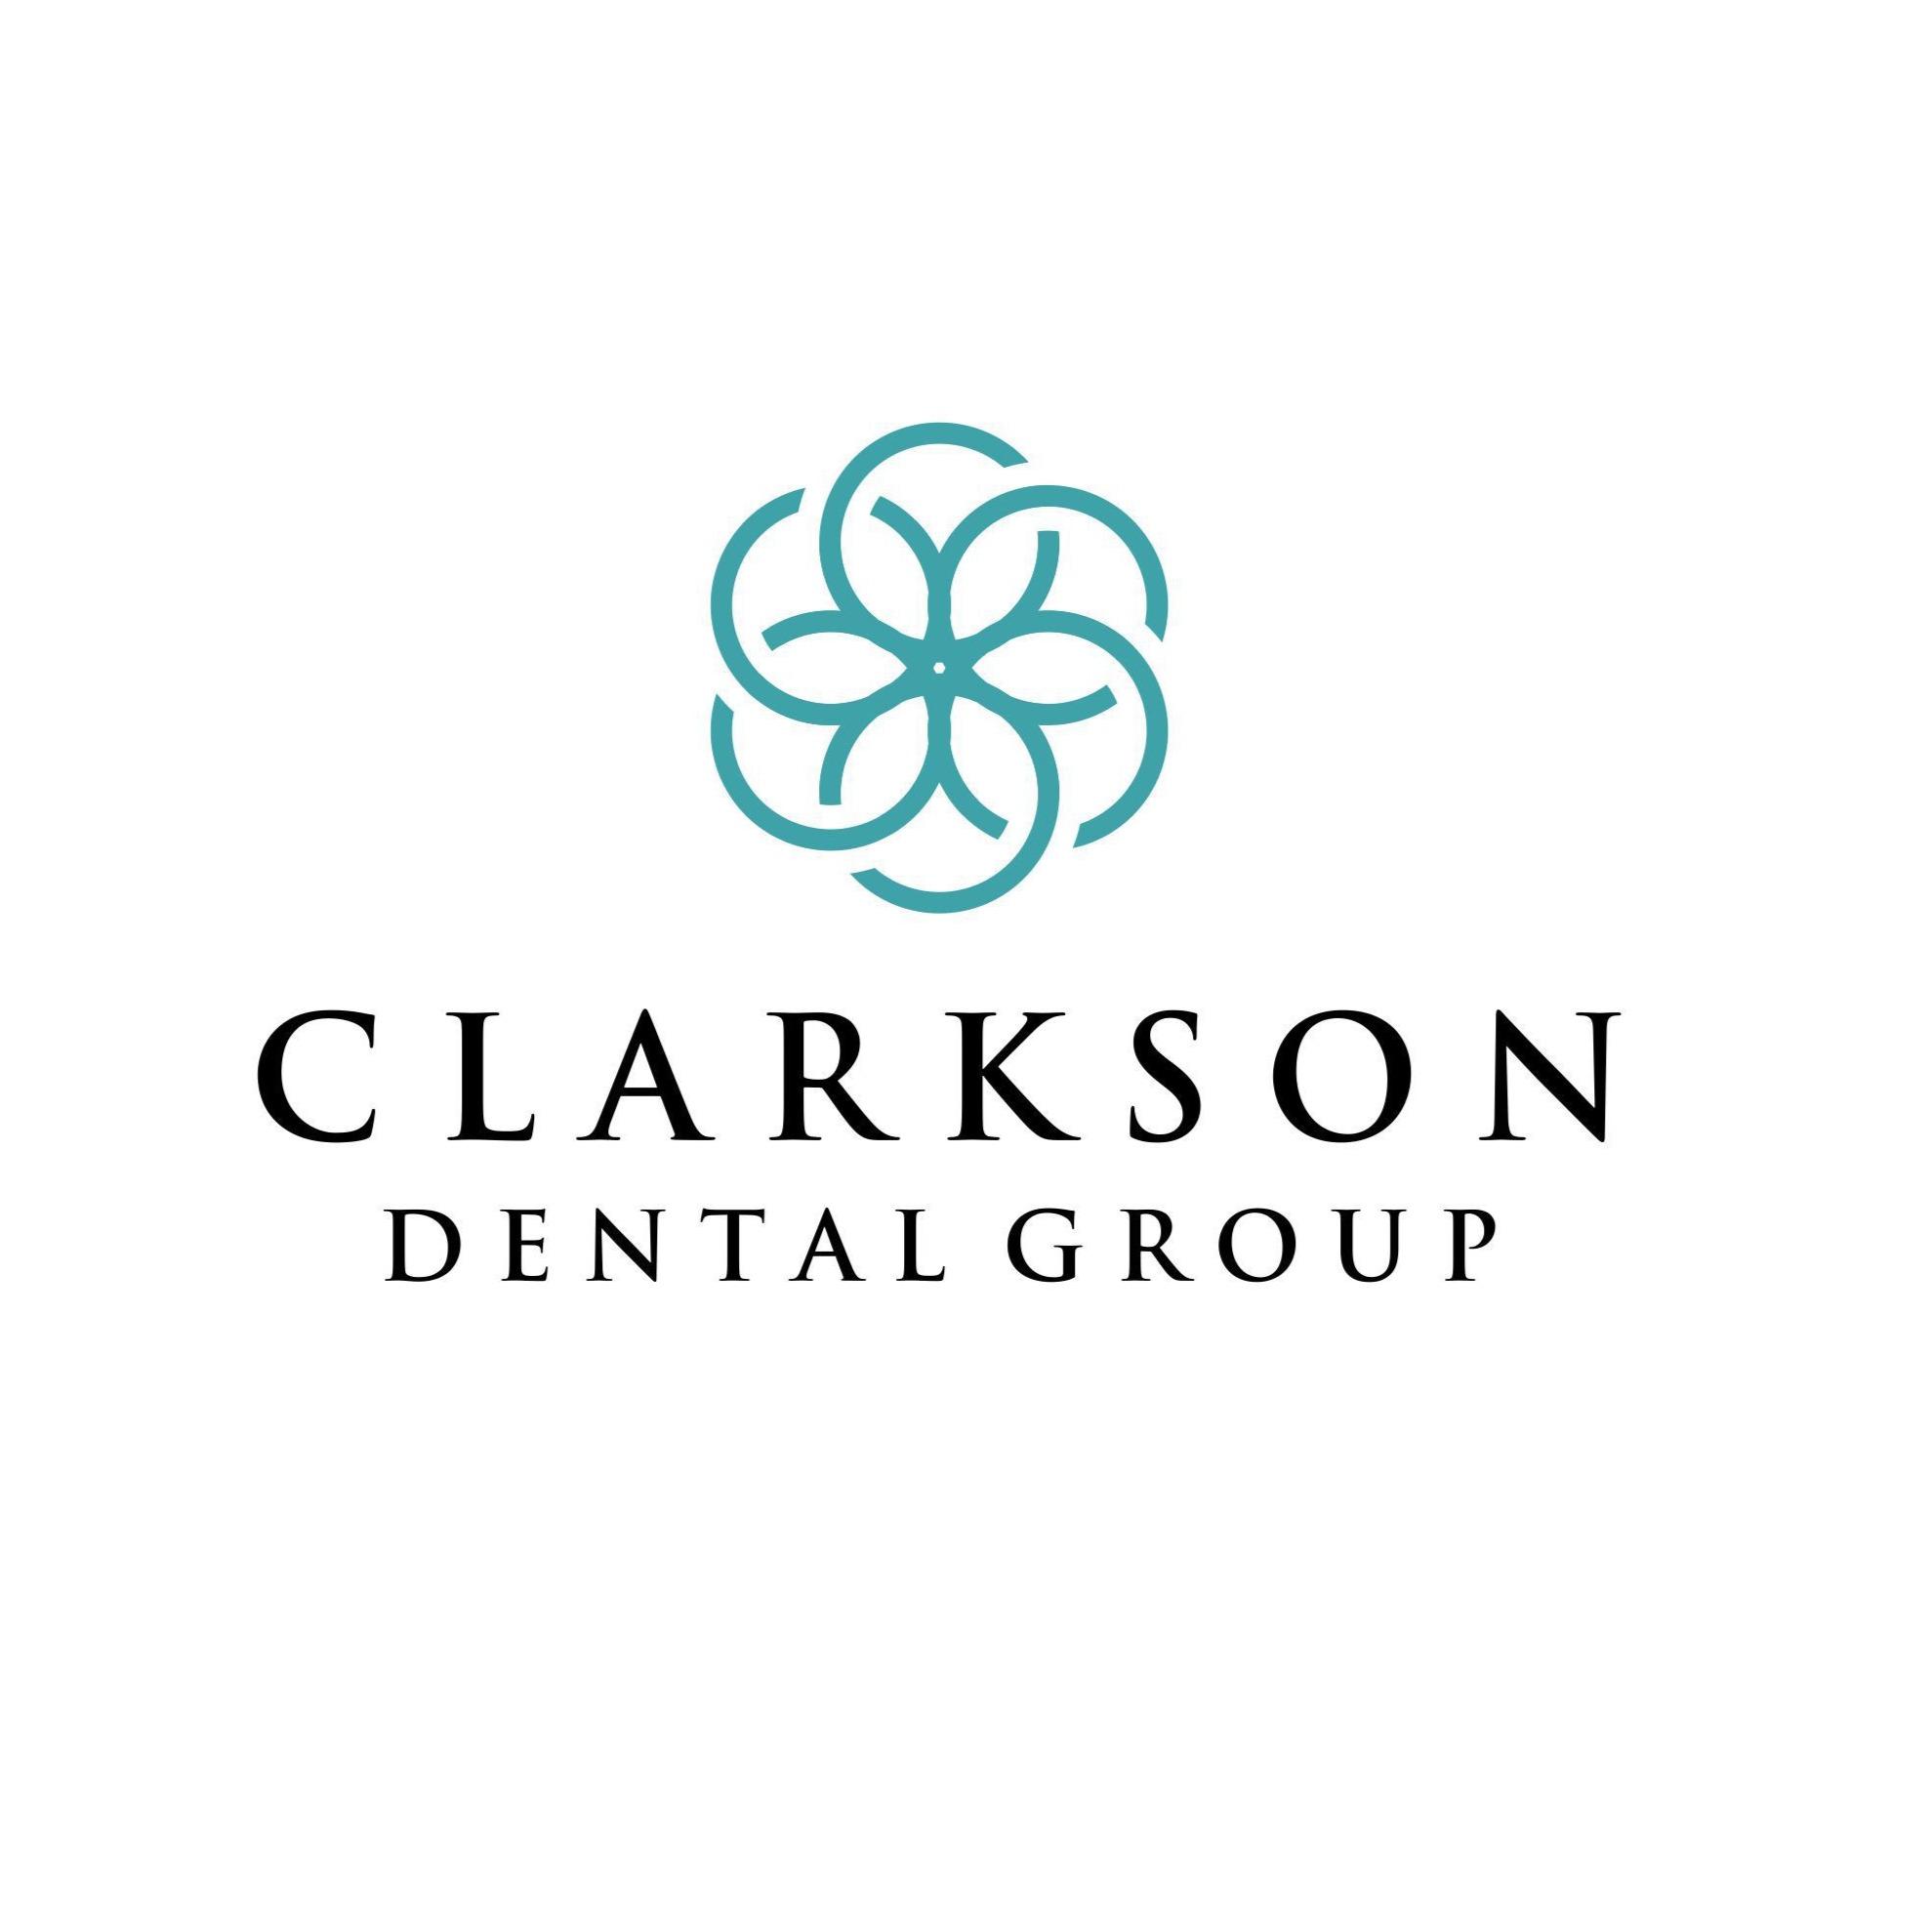 Clarkson Dental Group - Chesterfield, MO 63017 - (636)537-0065 | ShowMeLocal.com